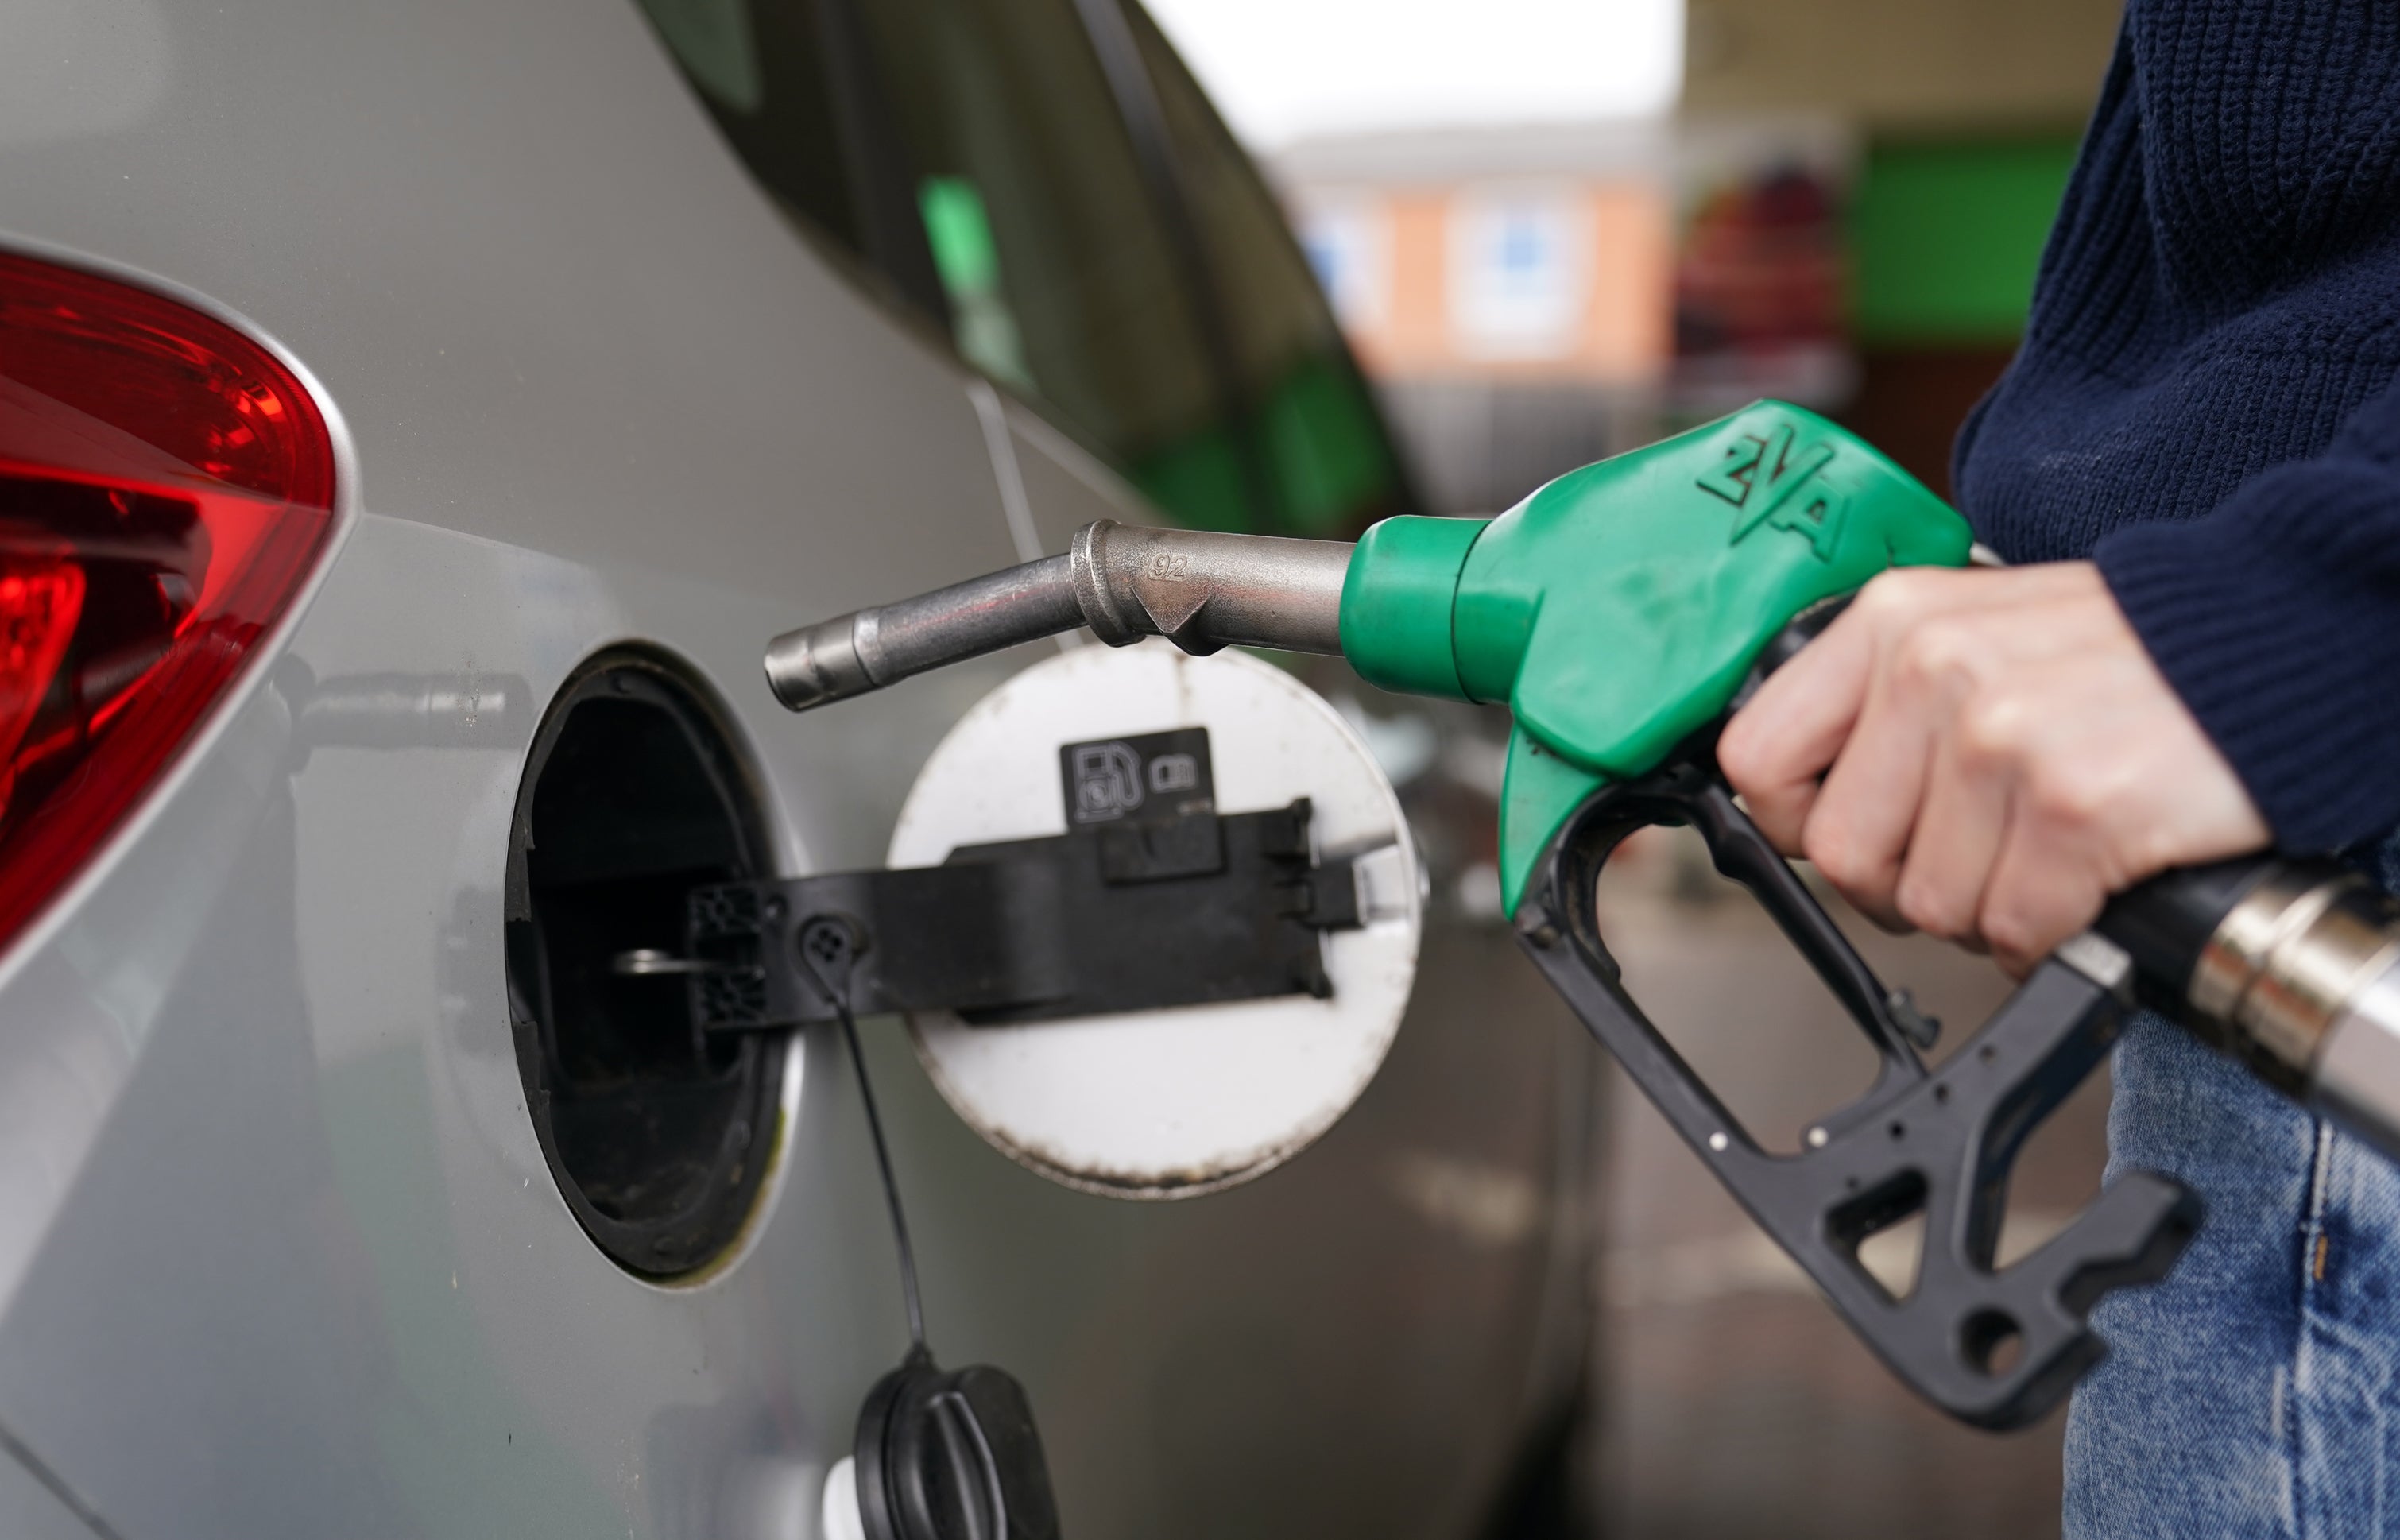 Fuel prices have been described as ‘pump fiction’ as they fail to reflect wholesale prices (Joe Giddens/PA)